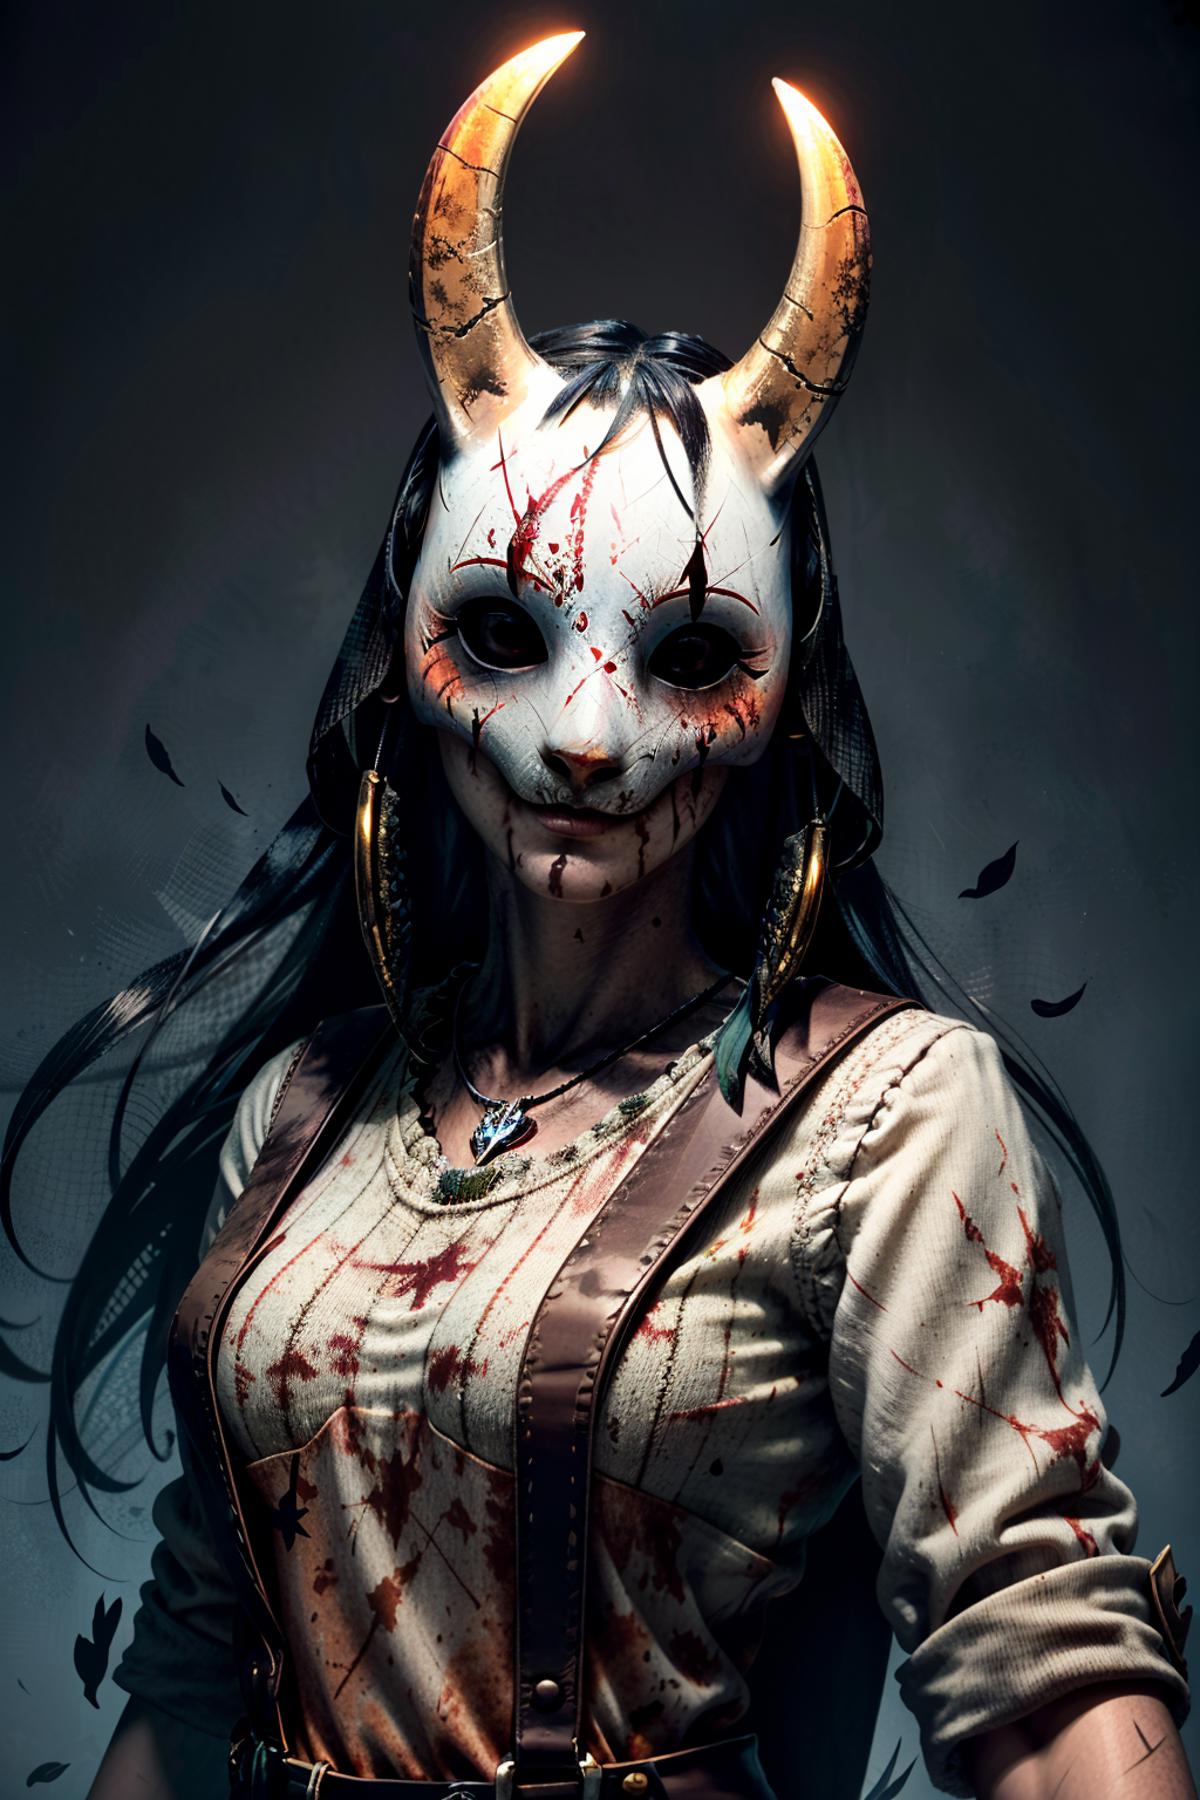 The Huntress from Dead by Daylight image by BloodRedKittie